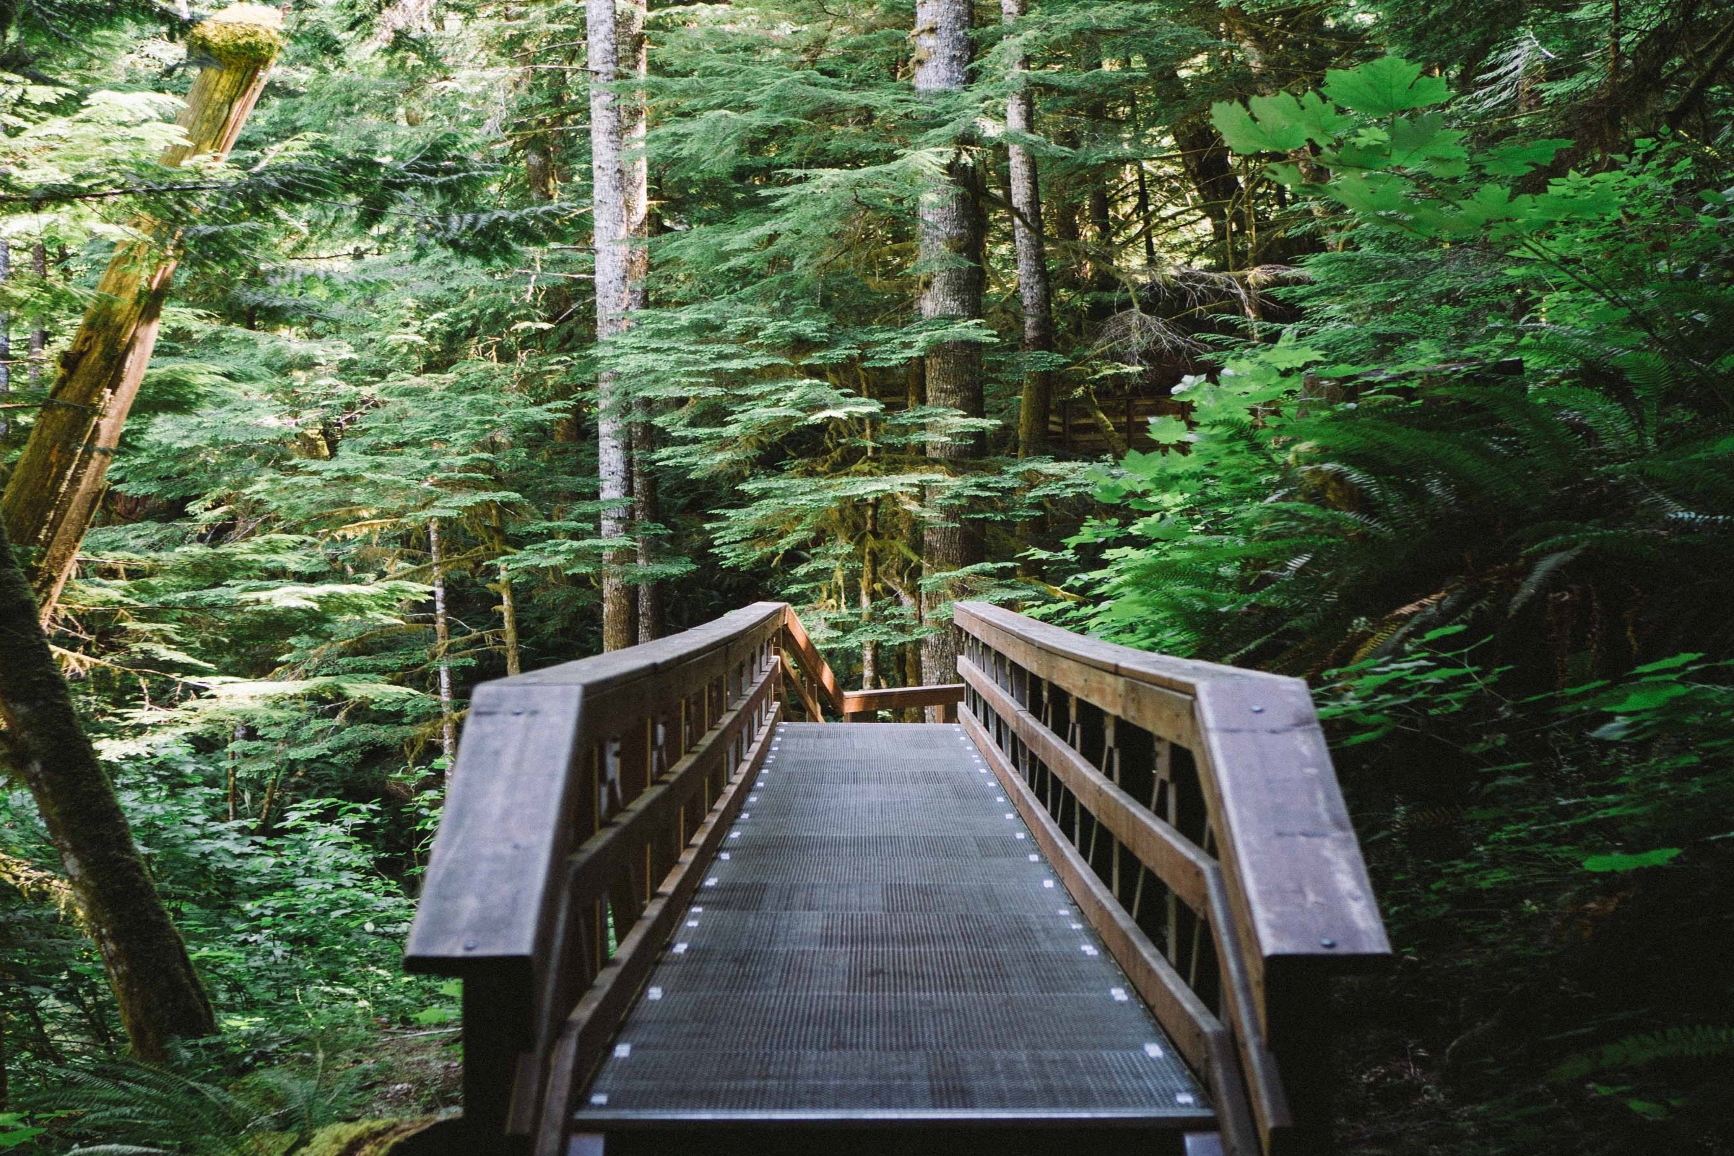 A wooden staircase nested between the thick forest foliage, ferns, and moss covered trees.